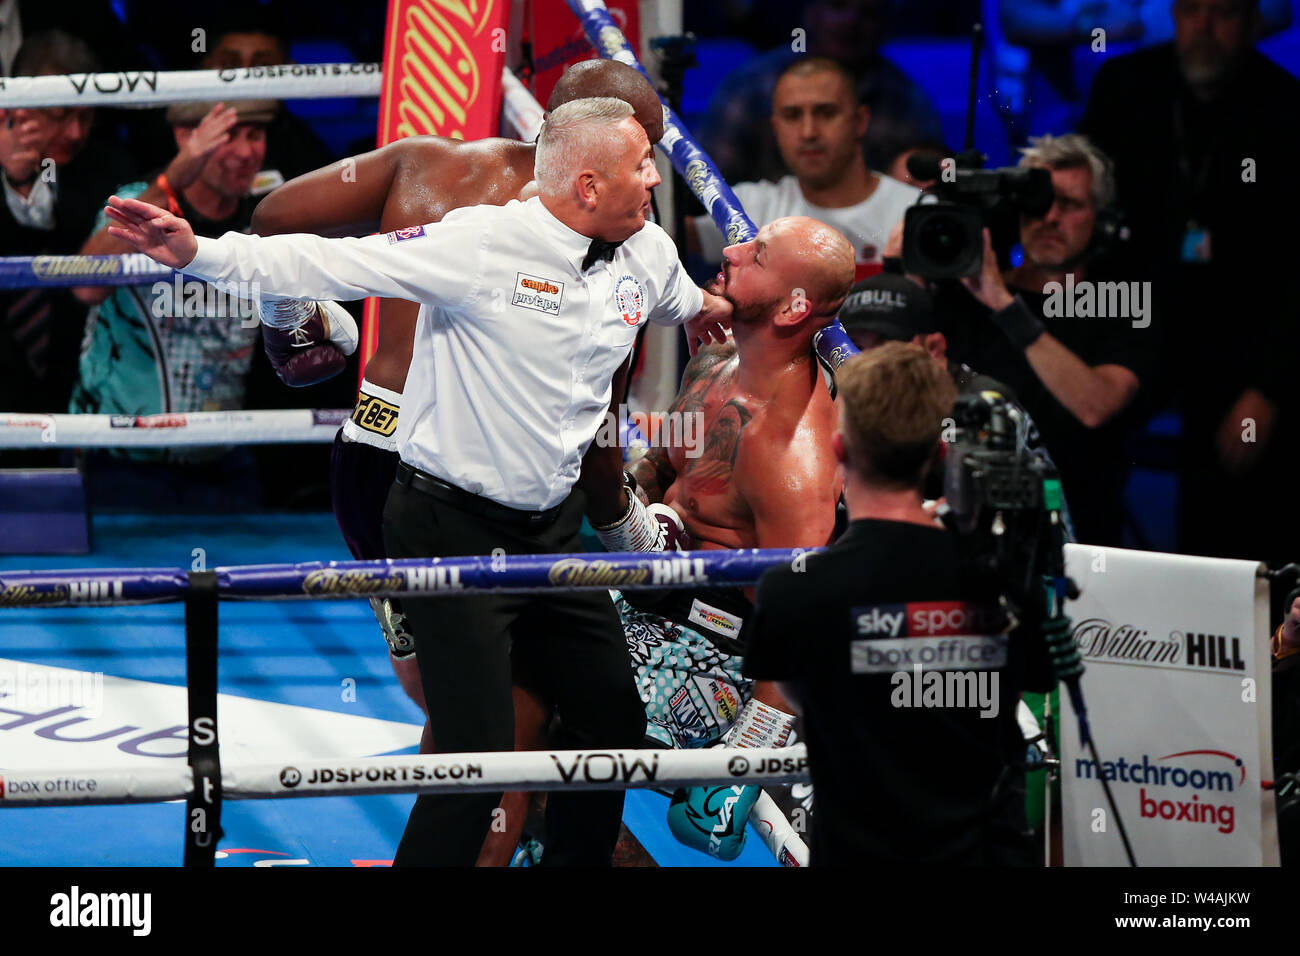 LONDON, ENGLAND - JULY 20: The referee jumps in as Dereck Chisora knocks out Artur Szpilka during the Heavyweight contest during the Matchroom Boxing Stock Photo